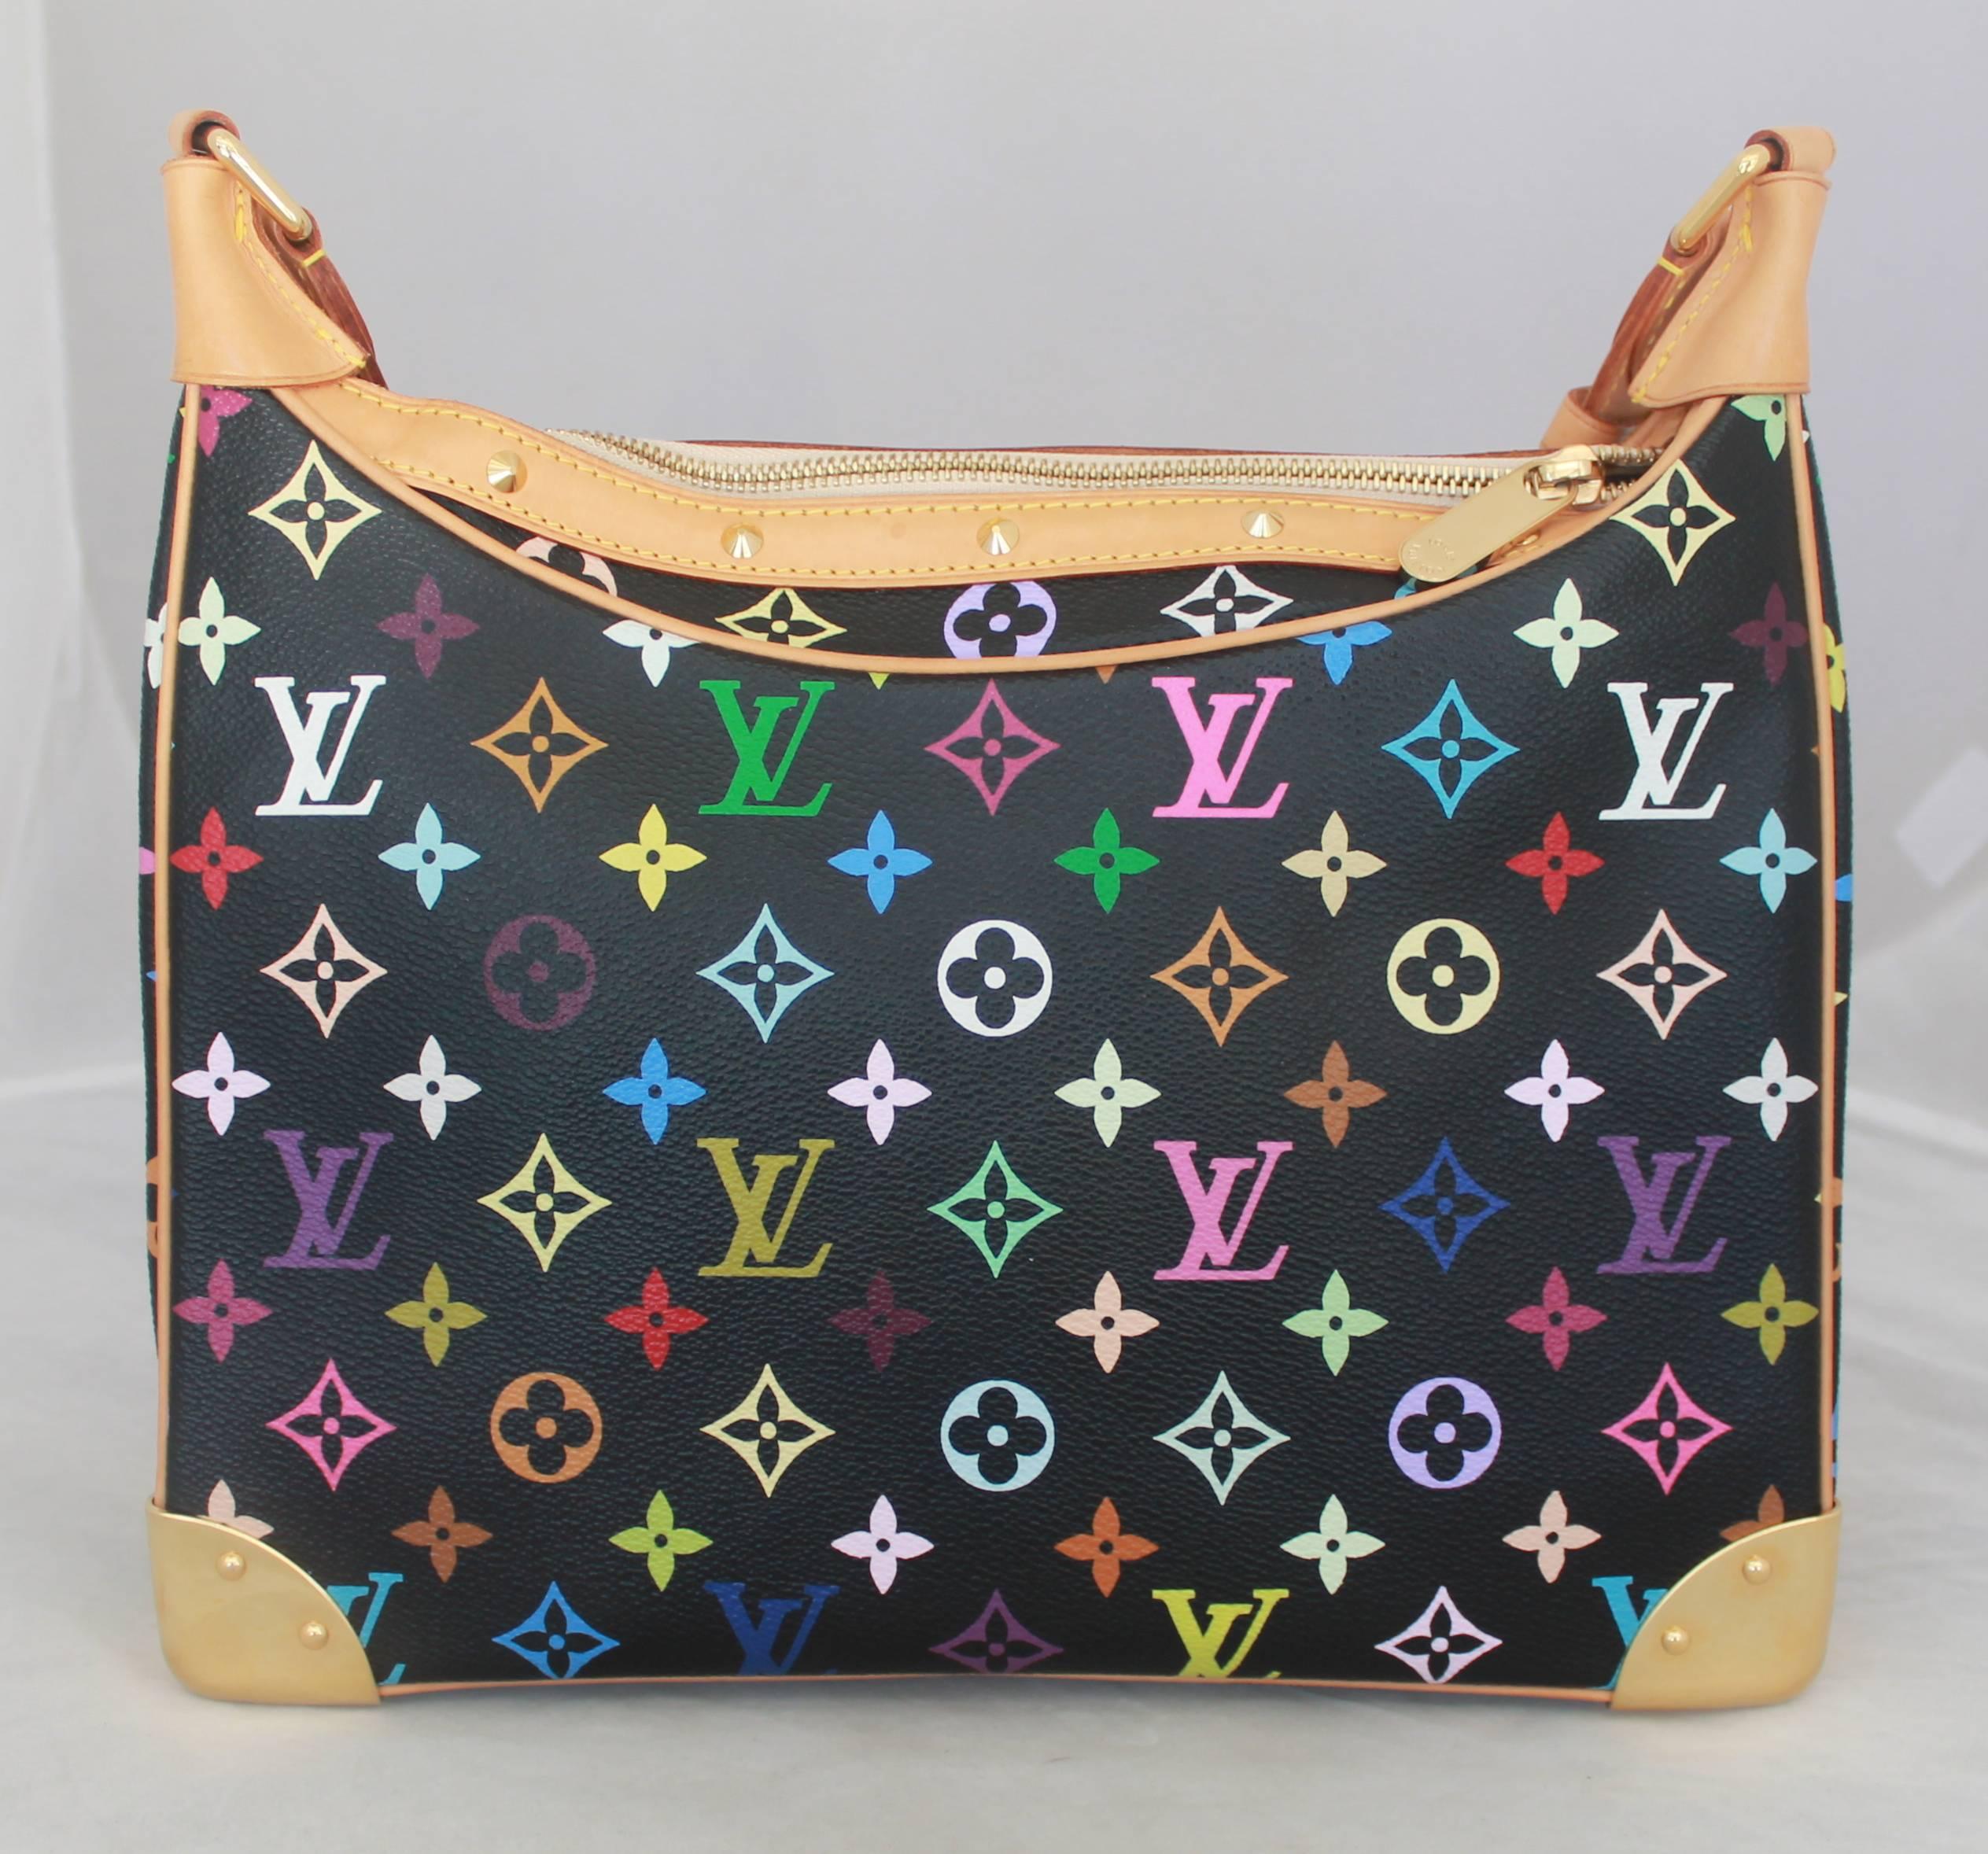 Louis Vuitton Black Boulogne Multi Murakami Shoulder Bag - GHW - 2003. This black shoulder bag features a multi-colored monogram pattern, tan trim, a front small zipper, and feet (shown in image 3). It comes with a duster and is in excellent